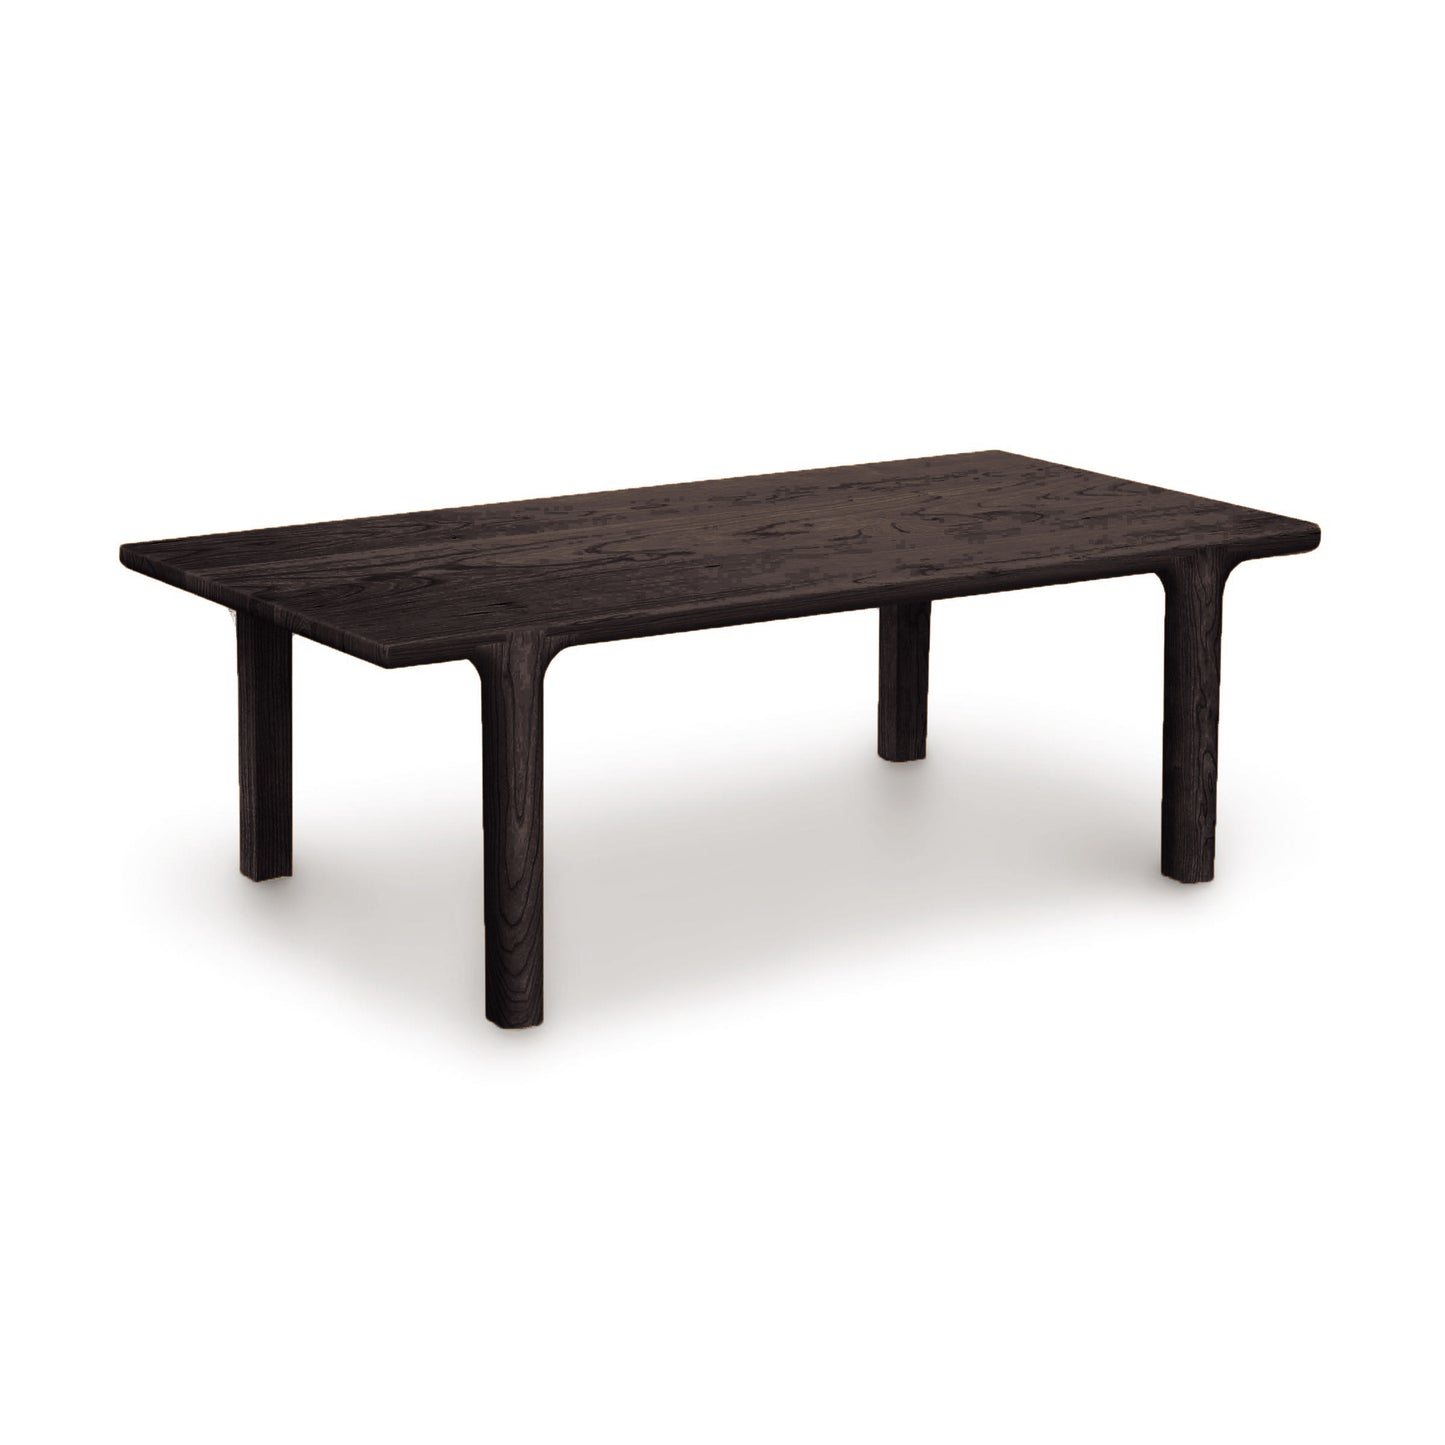 A rectangular, dark wooden Copeland Furniture Sierra Rectangular Coffee Table with four legs, made from solid North American hardwood, isolated on a white background.